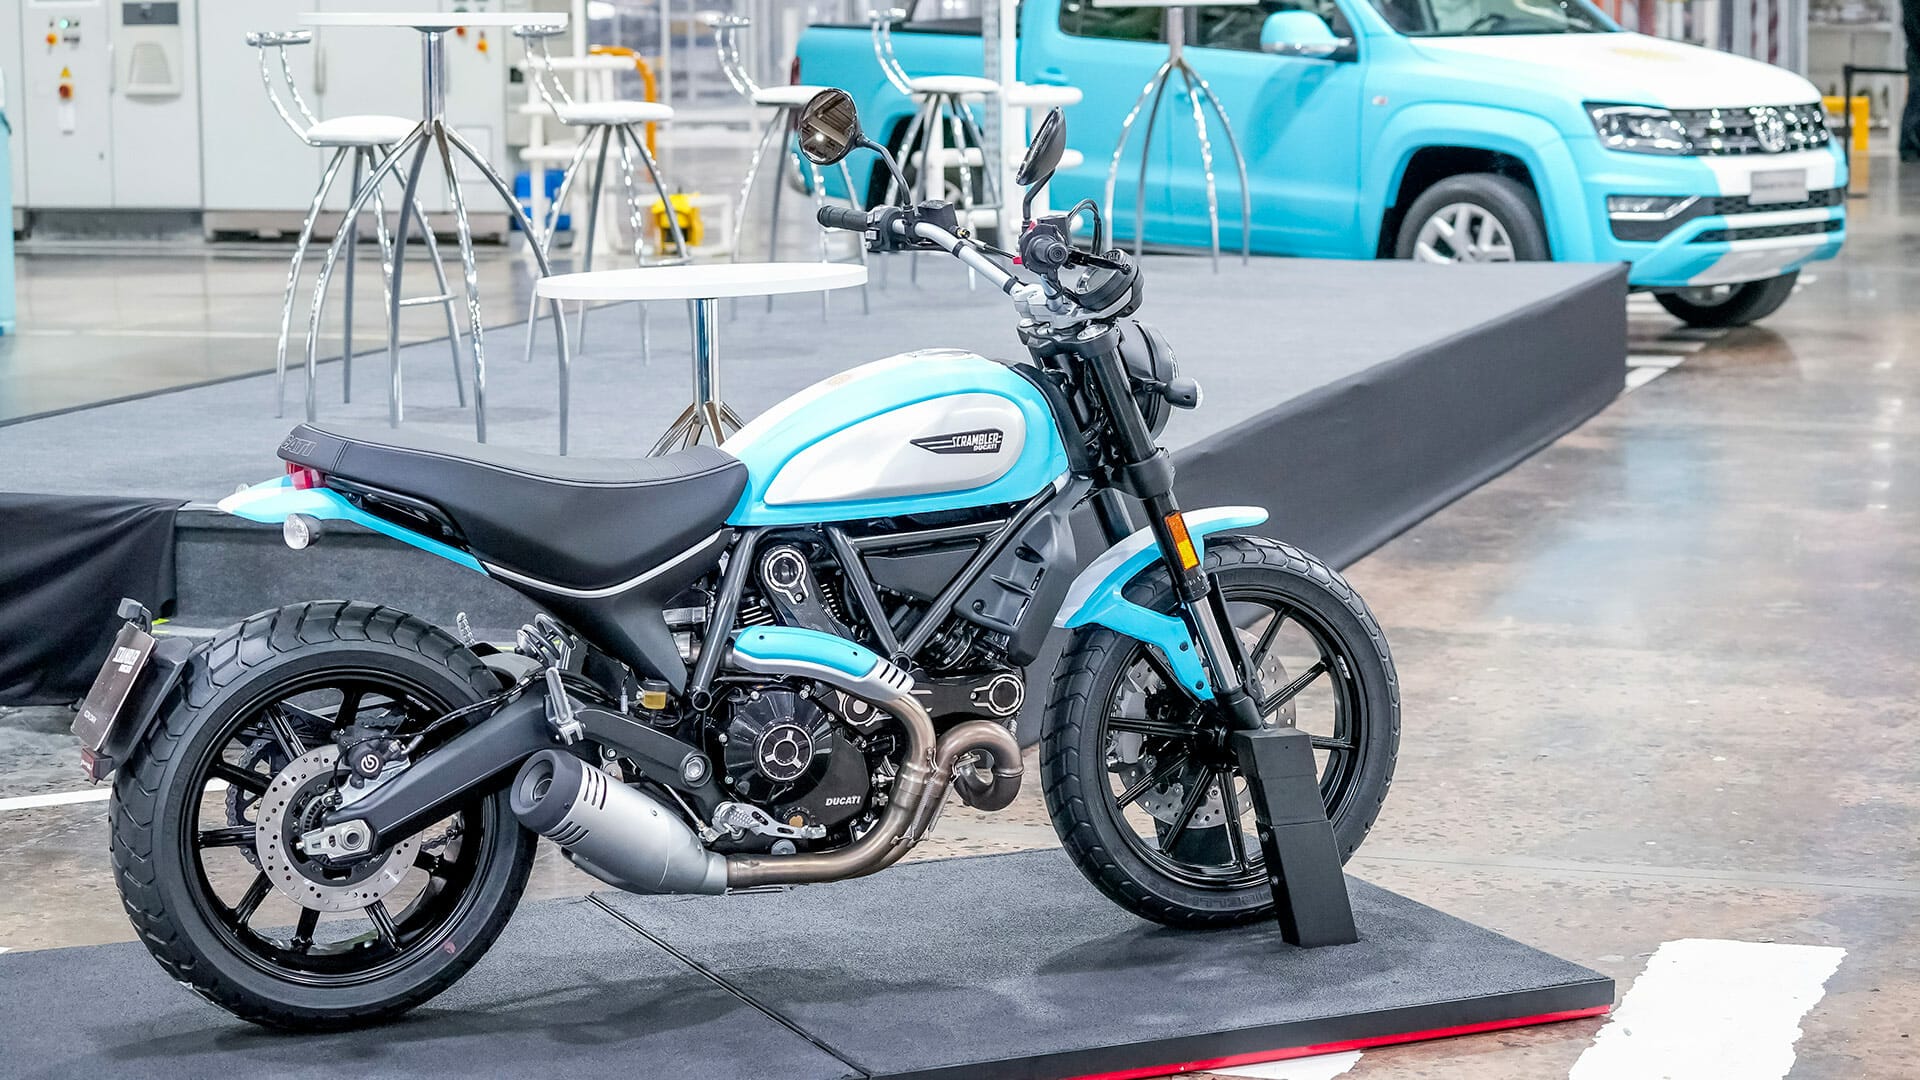 VW to build Ducati Scrambler for and in Argentina - MOTORCYCLES.NEWS